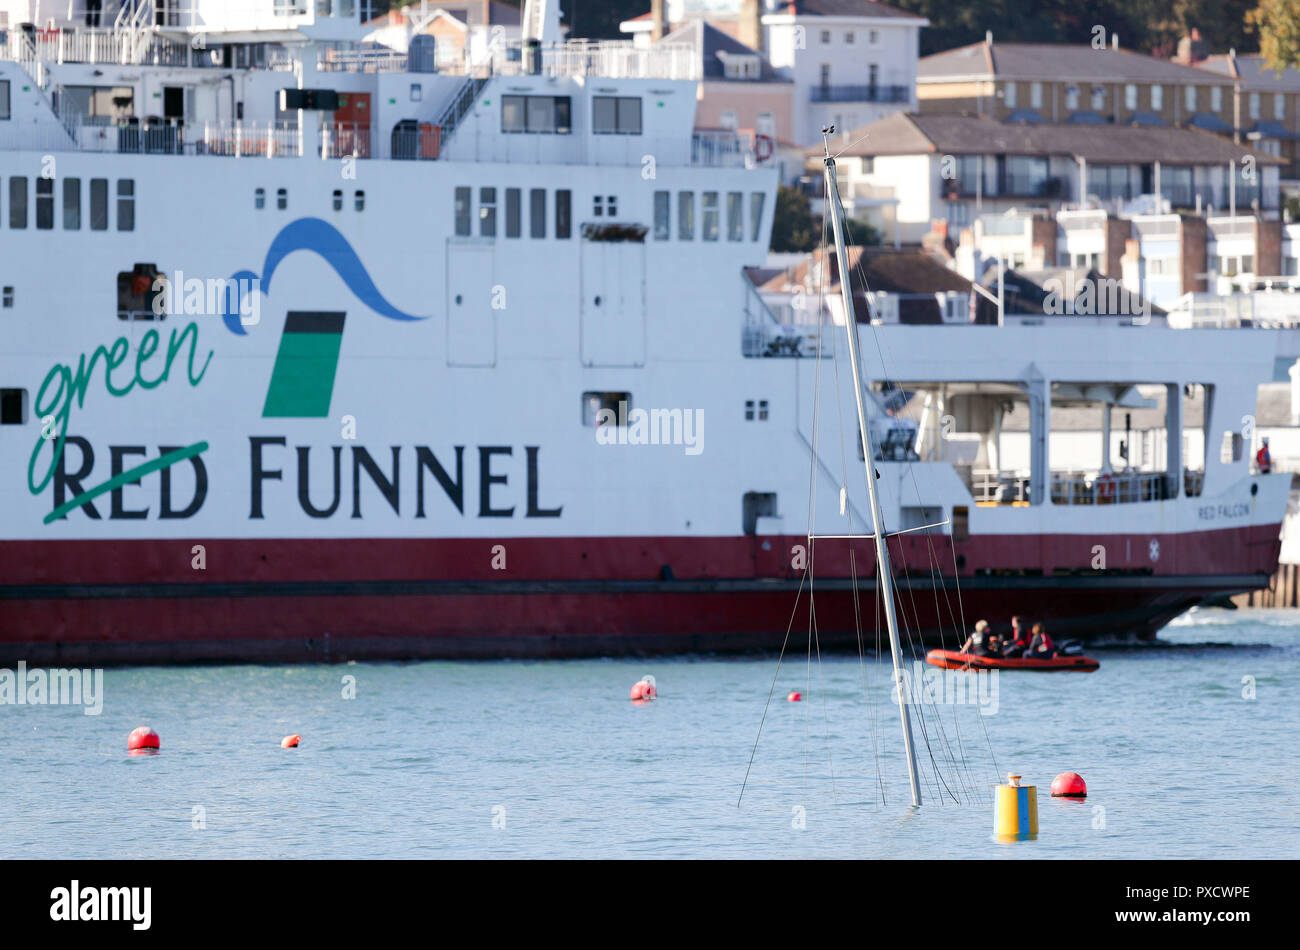 The Red Funnel car ferry, Red Falcon, which earlier collided with several small boats due to bad weather, passes the mast of a submerged yacht as she leaves East Cowes on the Isle of Wight bound for Southampton. Stock Photo